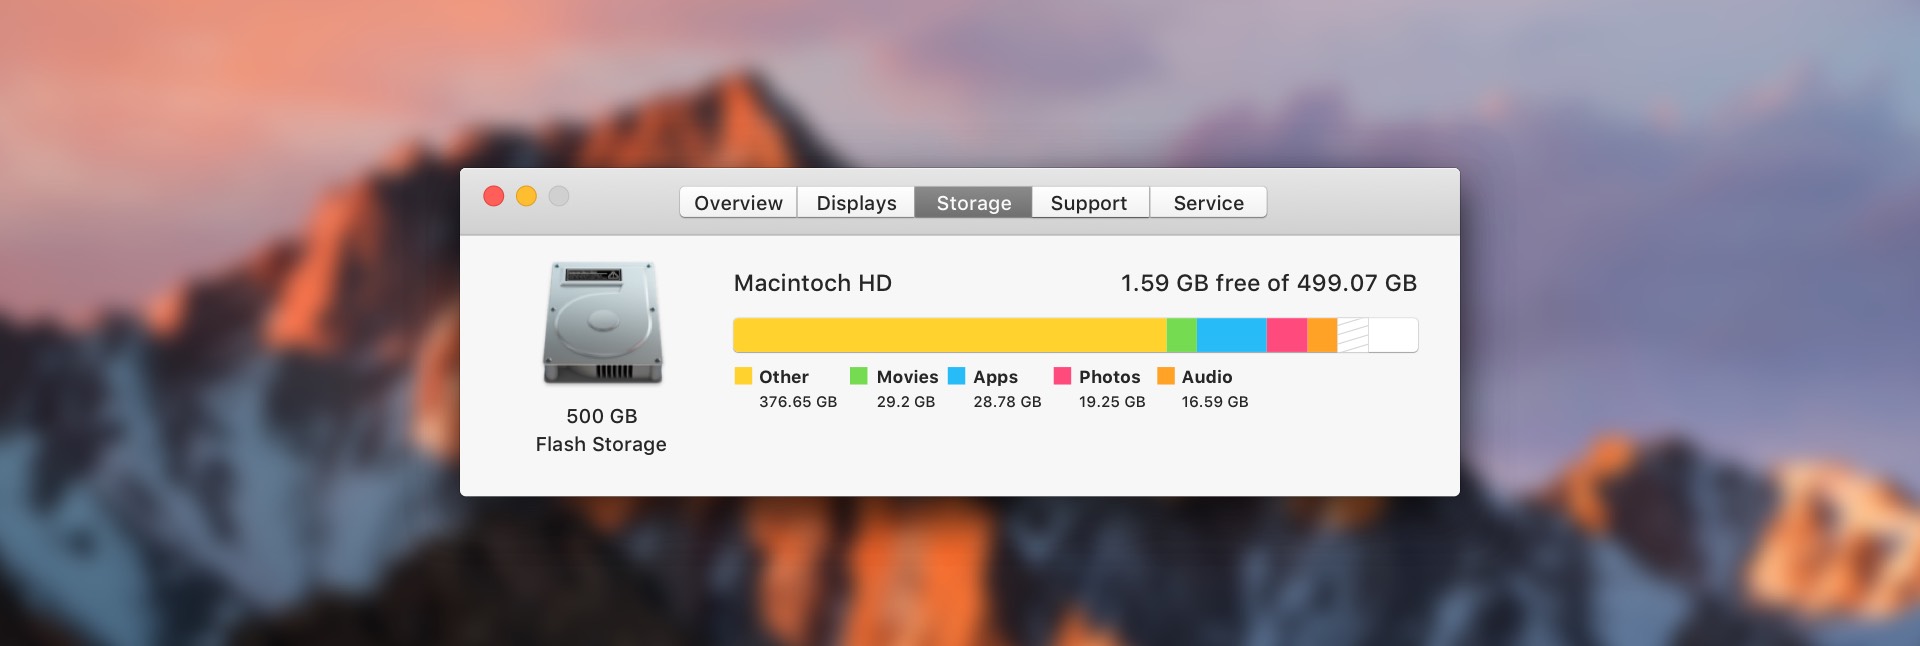 osx clean up disk space